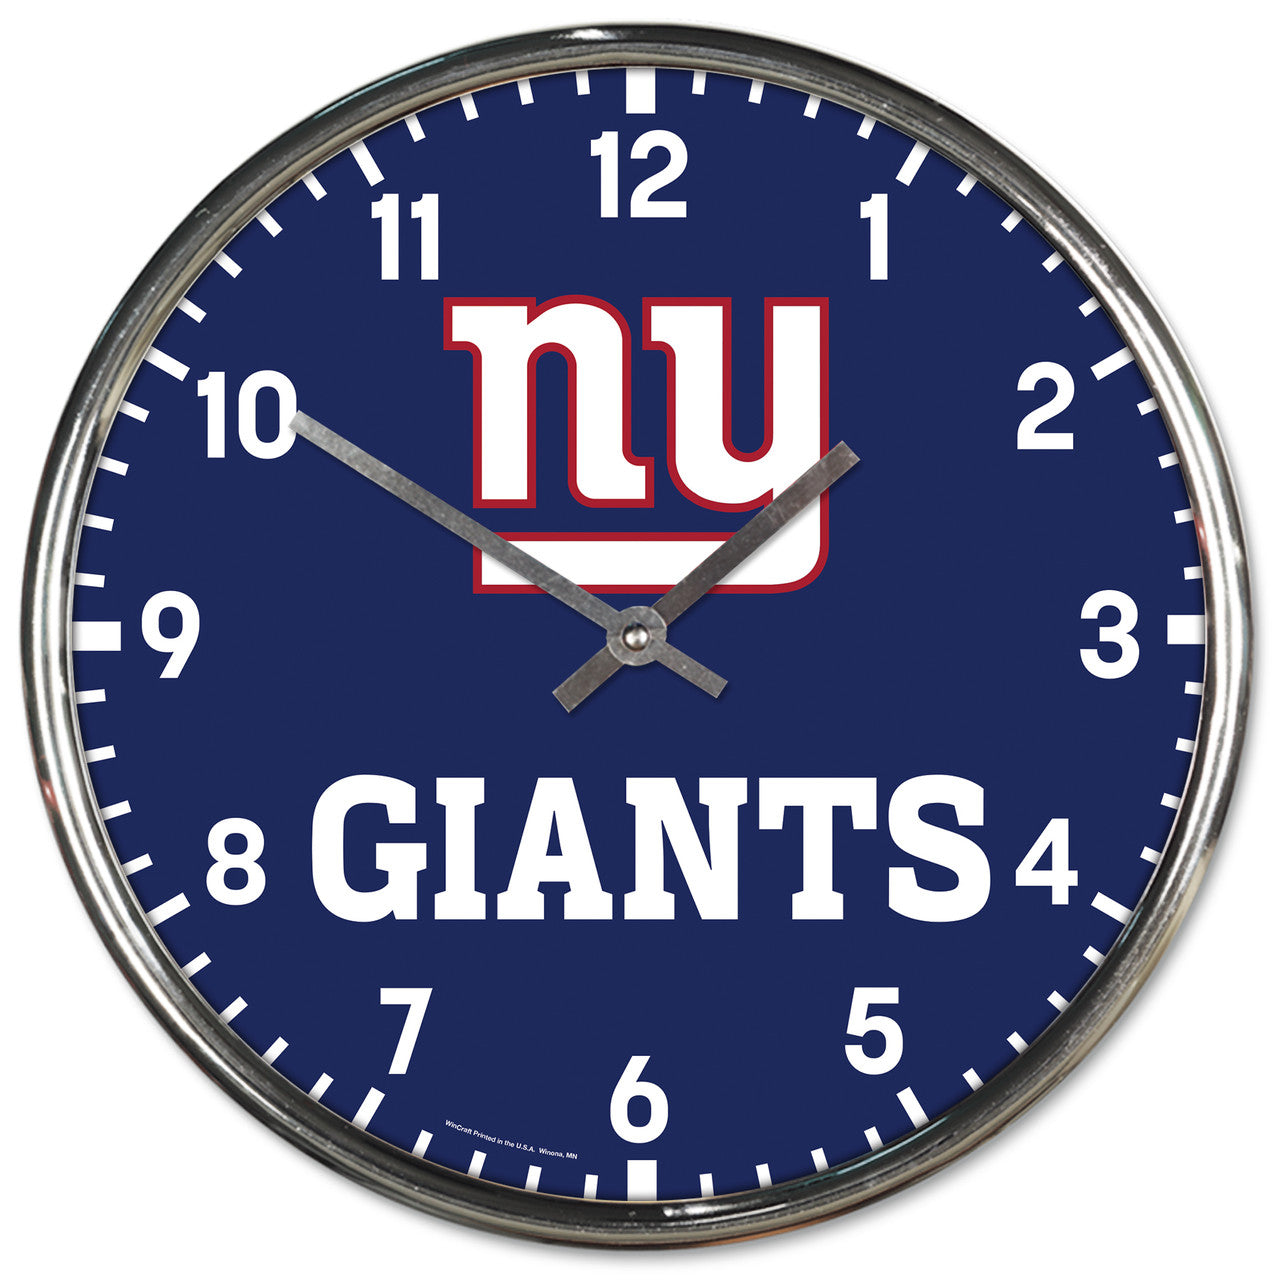 New York Giants 12" Round Wall Chrome Clock by Wincraft